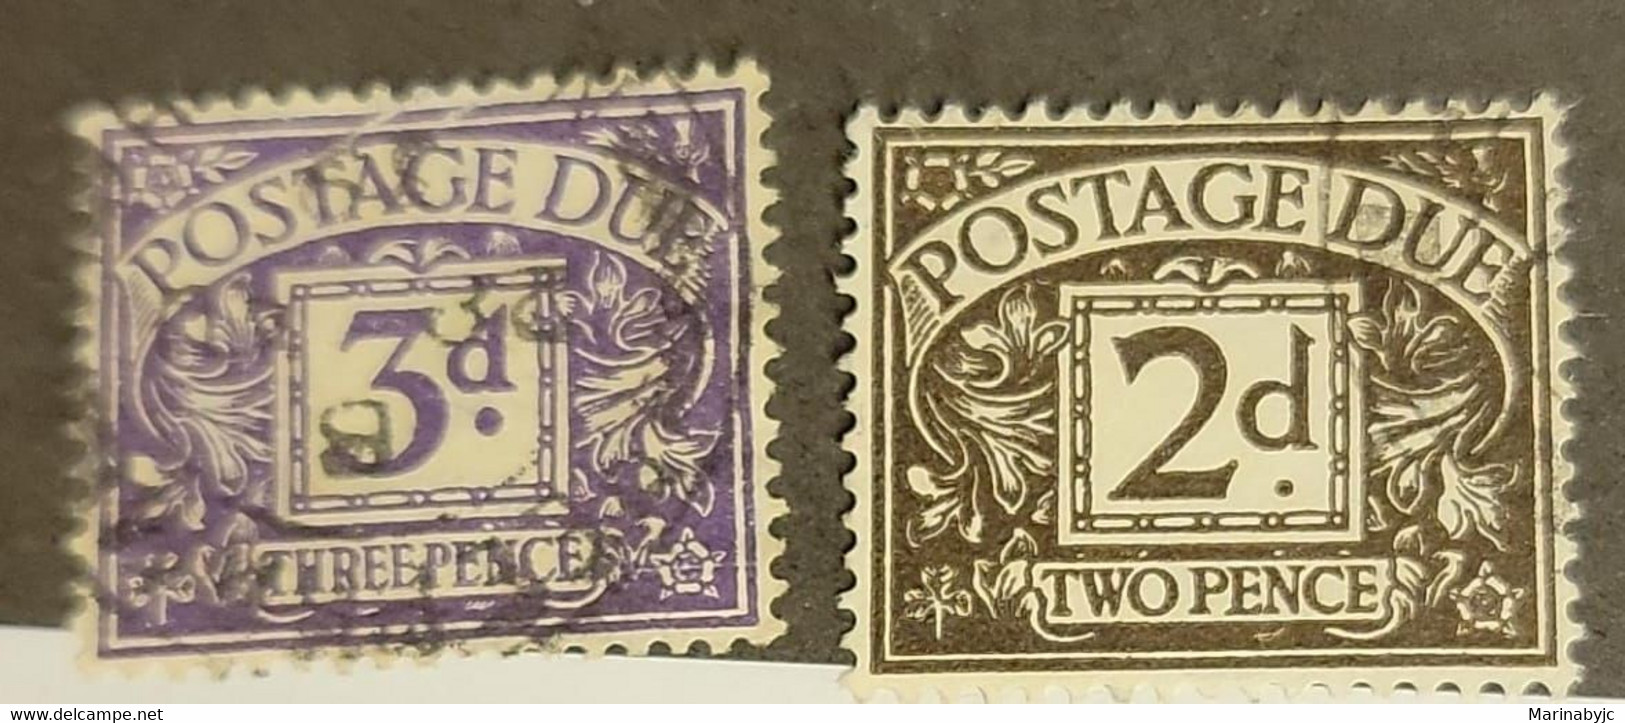 P) 1914 CIRCA GREAT BRITAIN, KING GEORGE V, POSTAGE DEUS, SET X2 MINT, USED - Unclassified